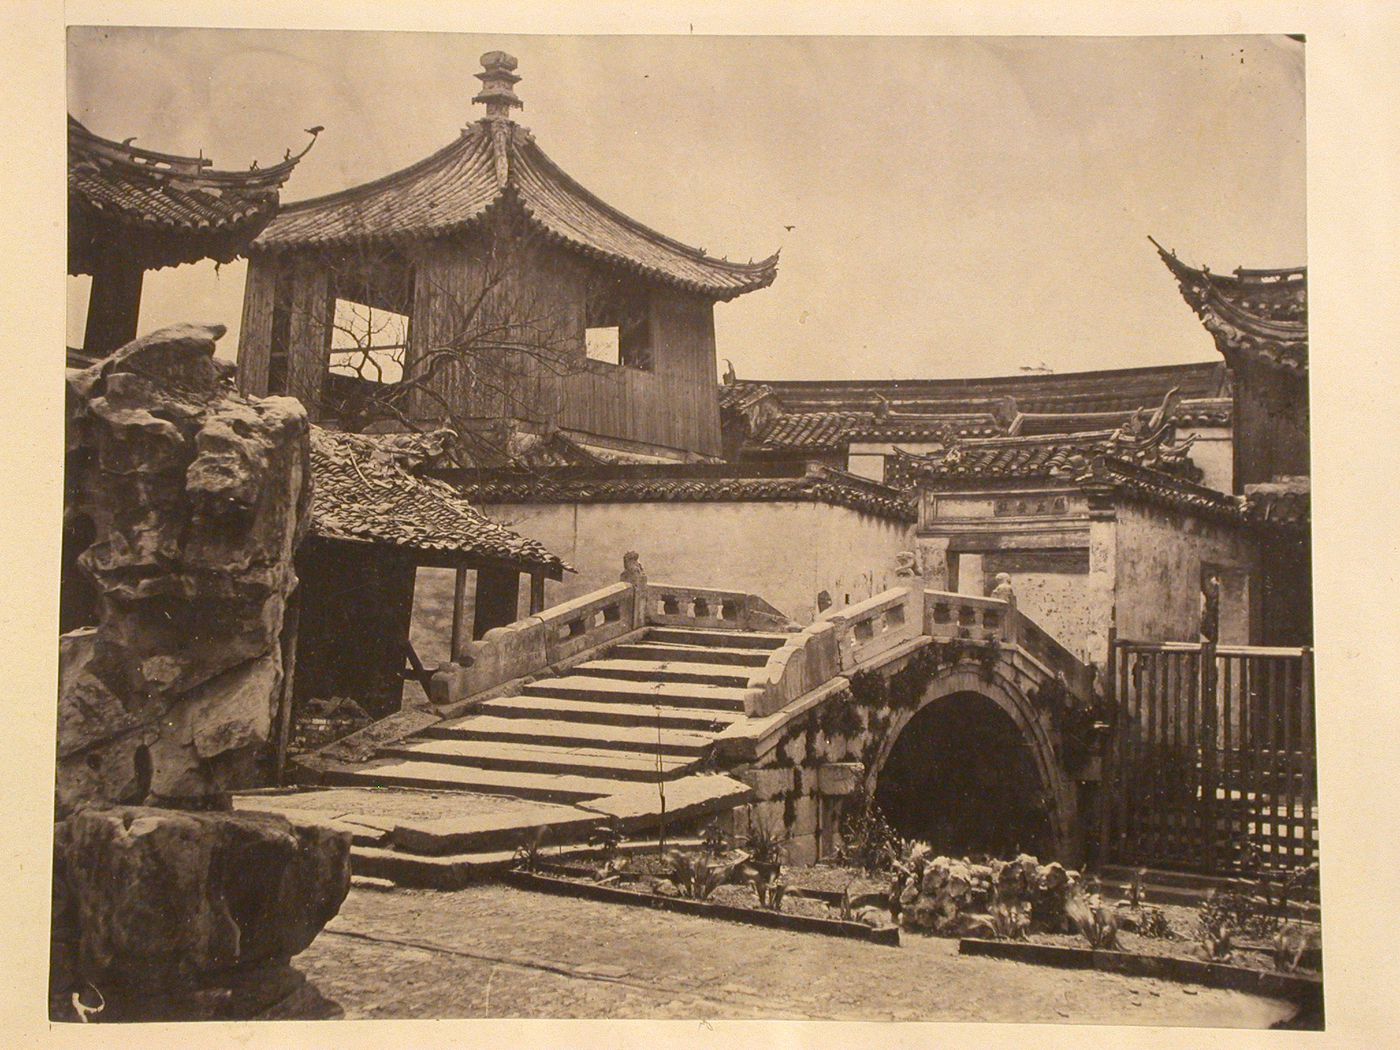 View of a bridge and buildings in Yu Yuan [The Garden to Please], Shanghai, China